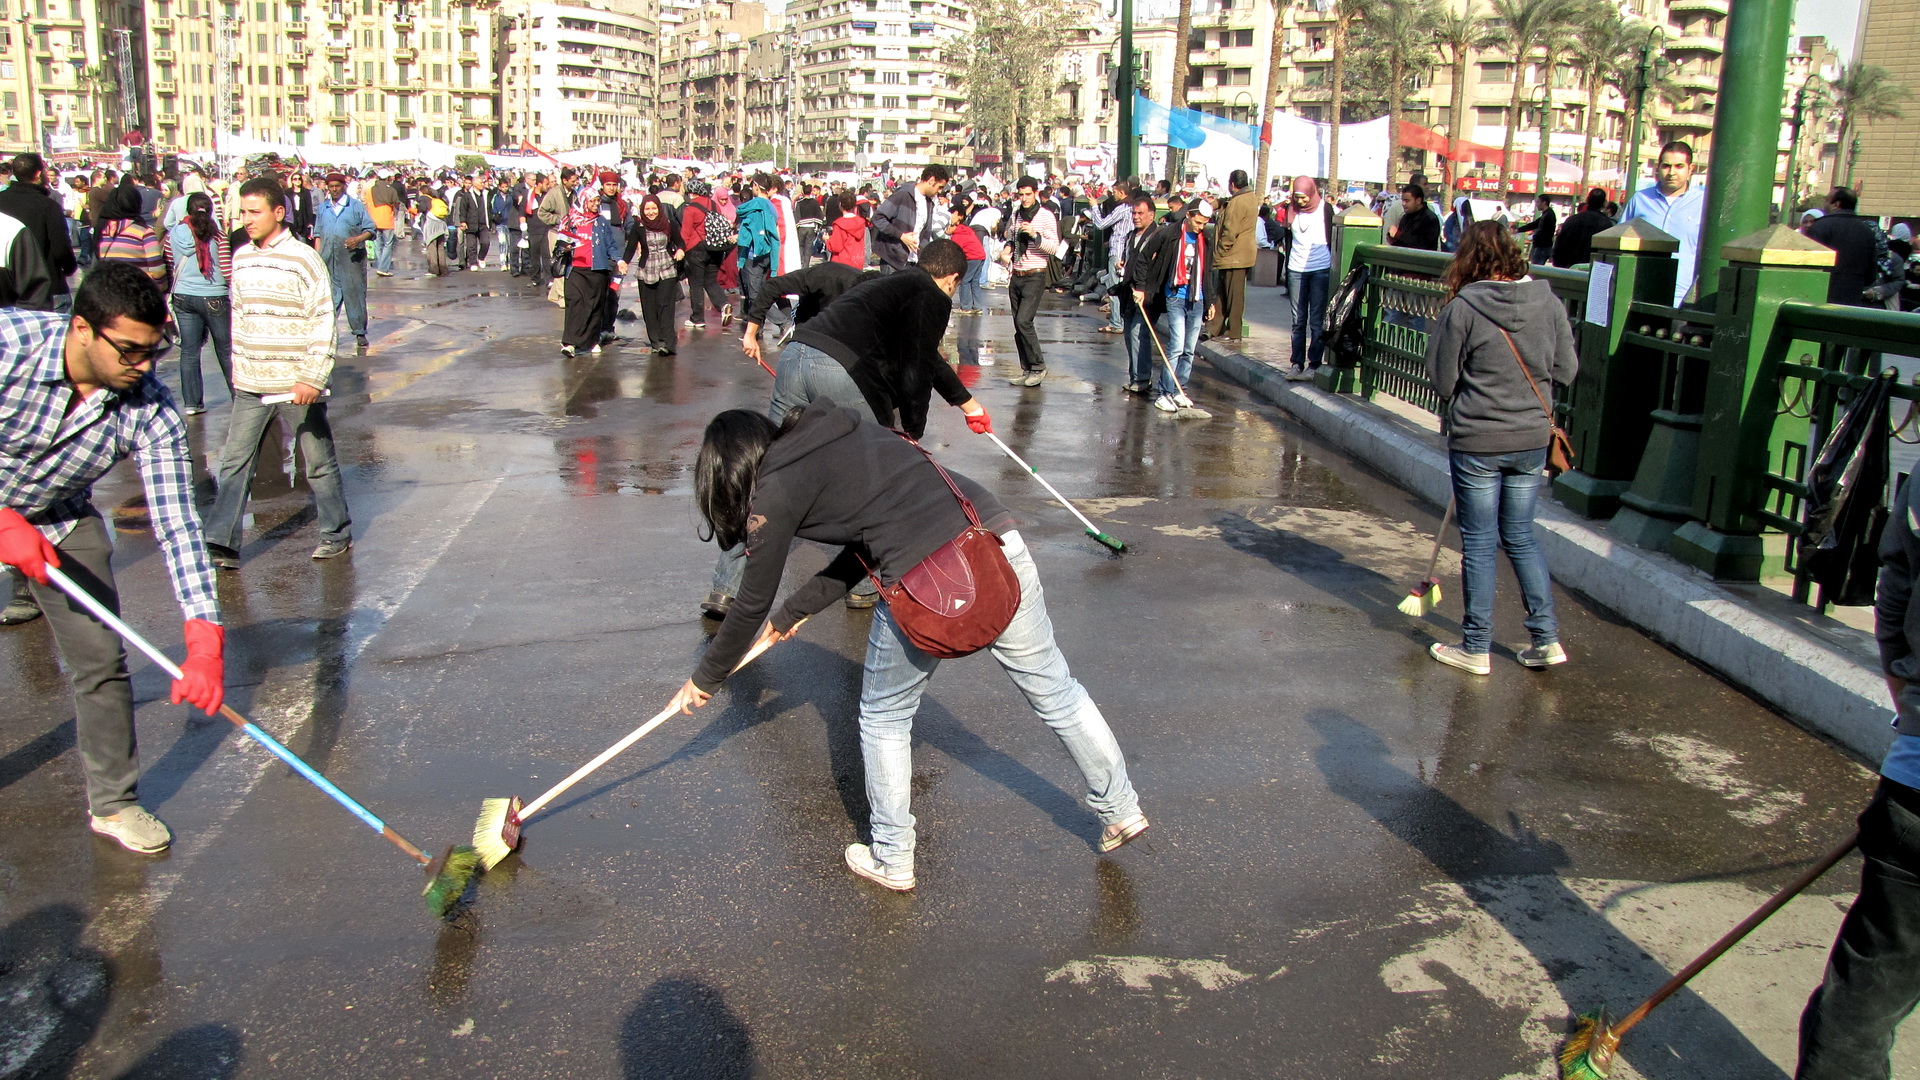 Protesters and volunteers sweep Tahrir Square, during the Egyptian Revolution of 2011, a day after Hosni Mubarak's resignation as president, in a gesture of a new beginning.